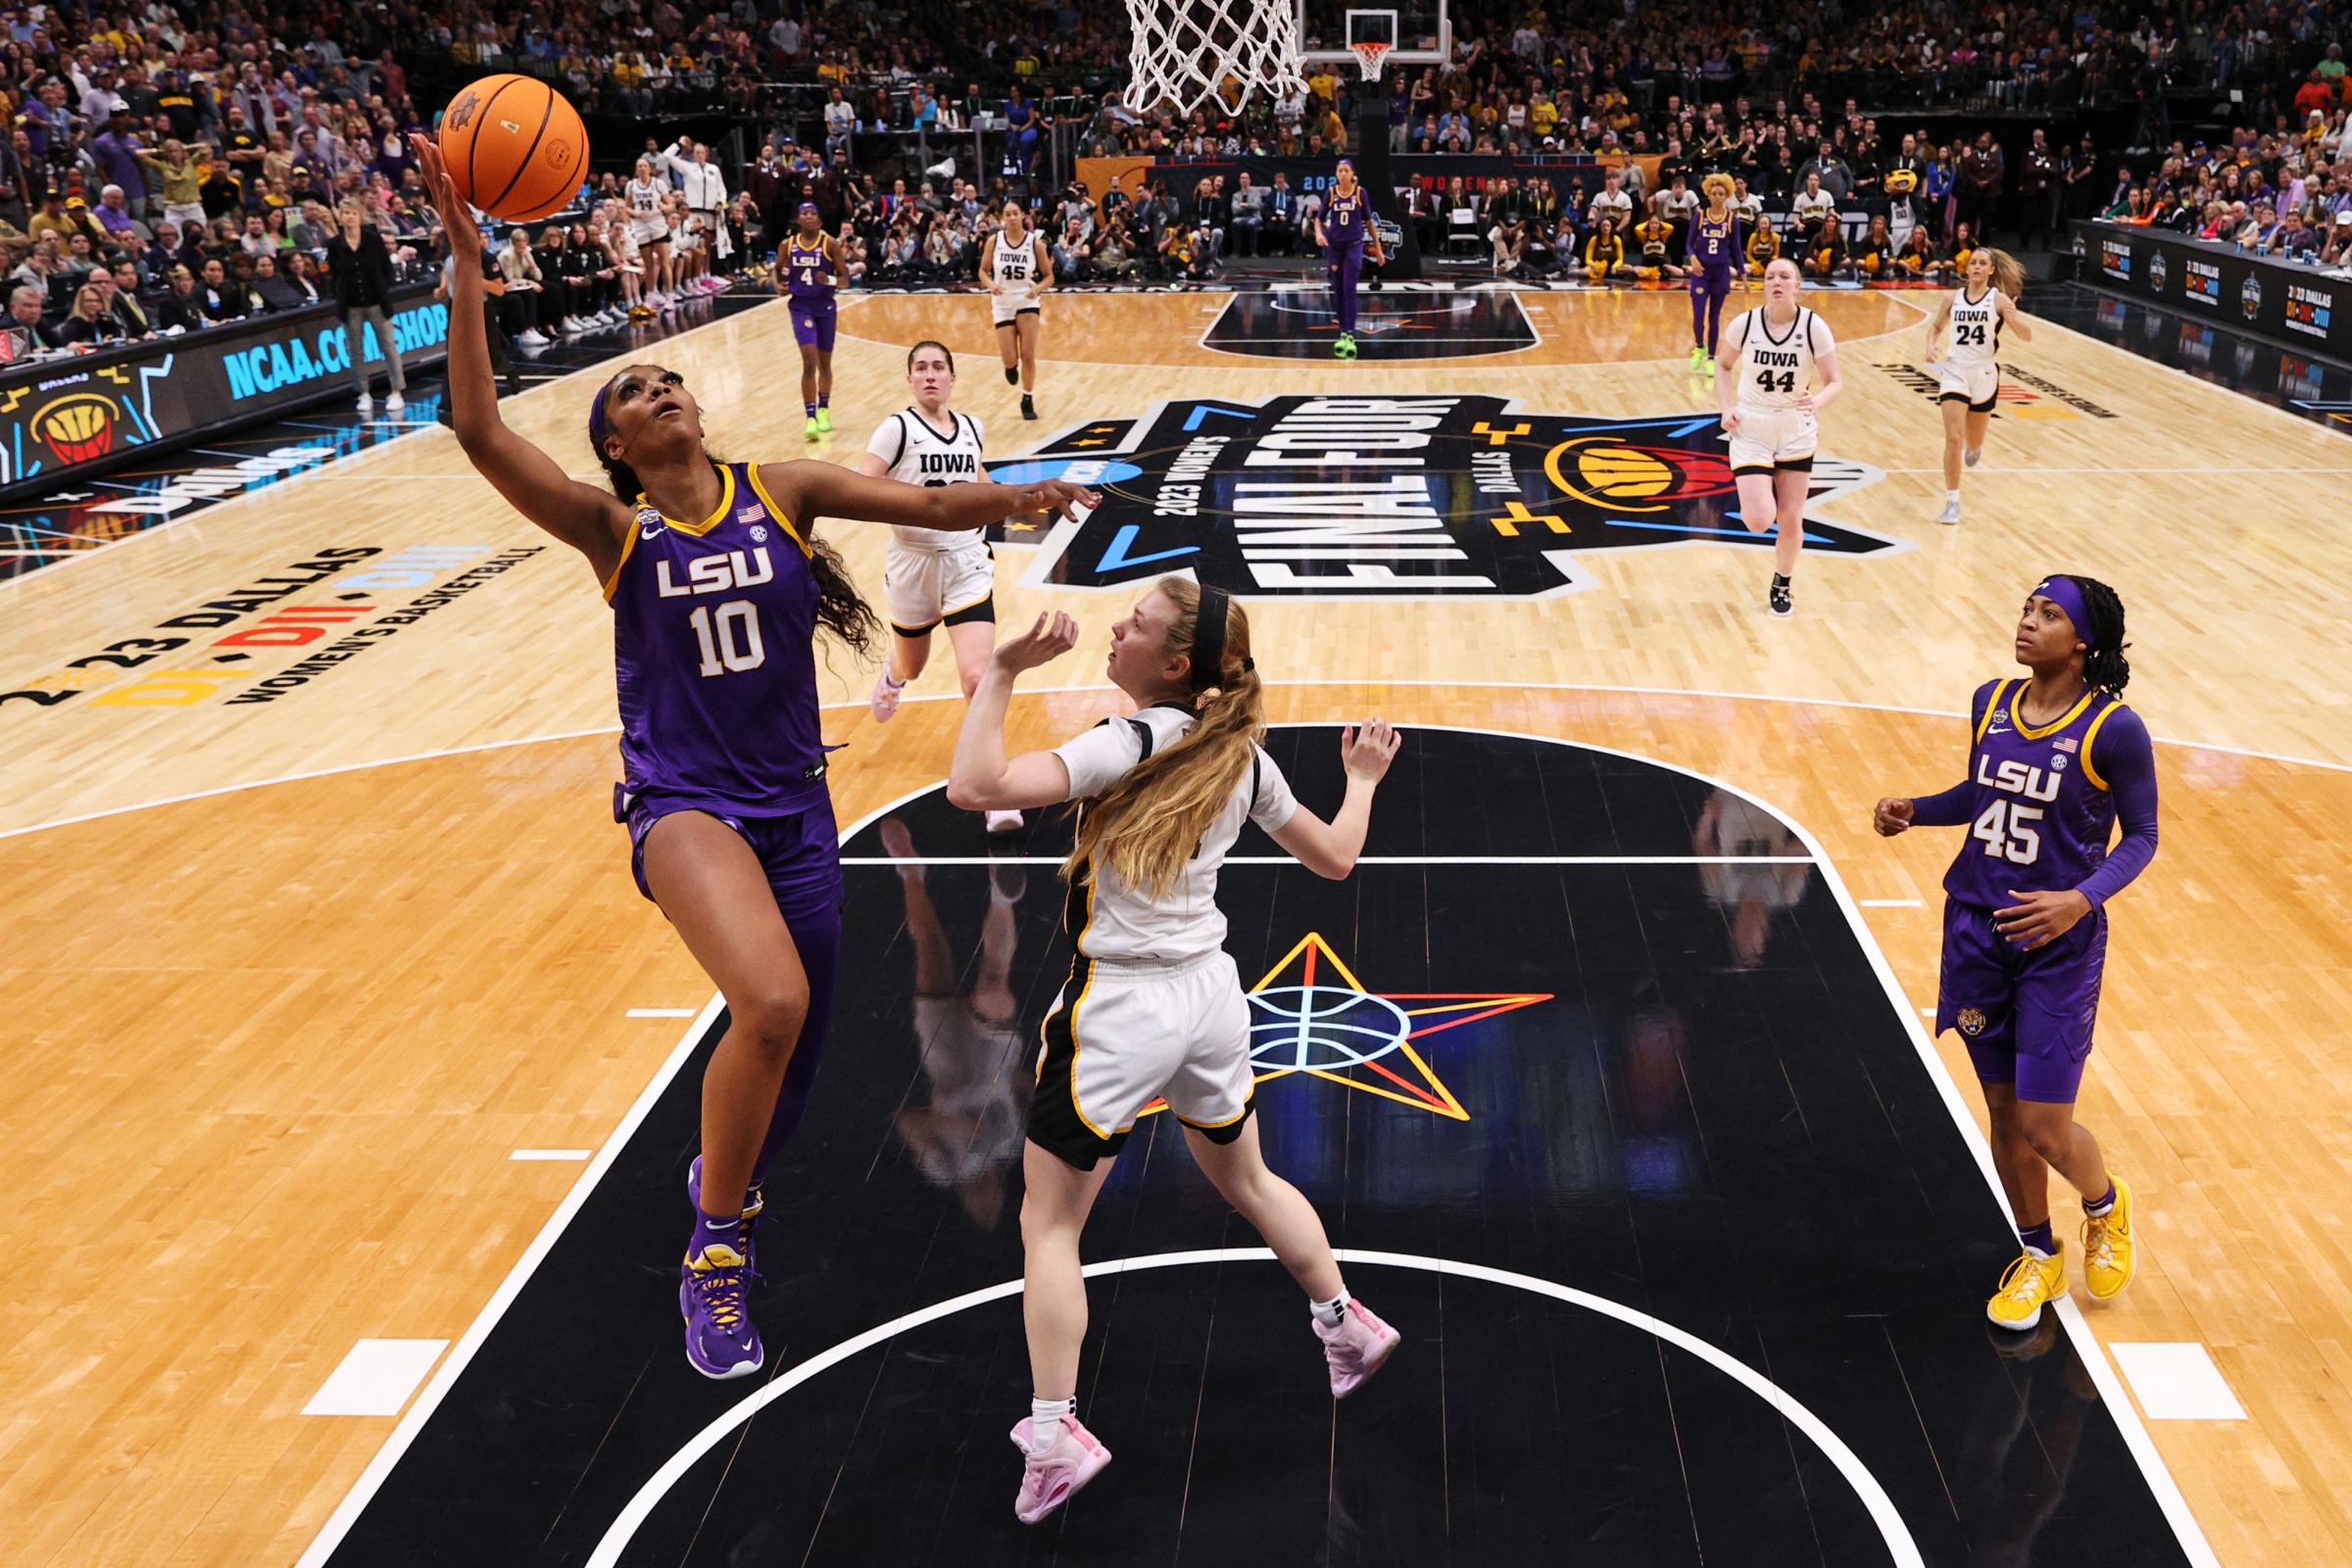 Angel Reese #10 of the LSU Lady Tigers drives to the basket against Molly Davis #1 of the Iowa Hawkeyes during the second half of the 2023 NCAA Women's Basketball Tournament championship game at American Airlines Center in Dallas, Texas, on April 02, 2023